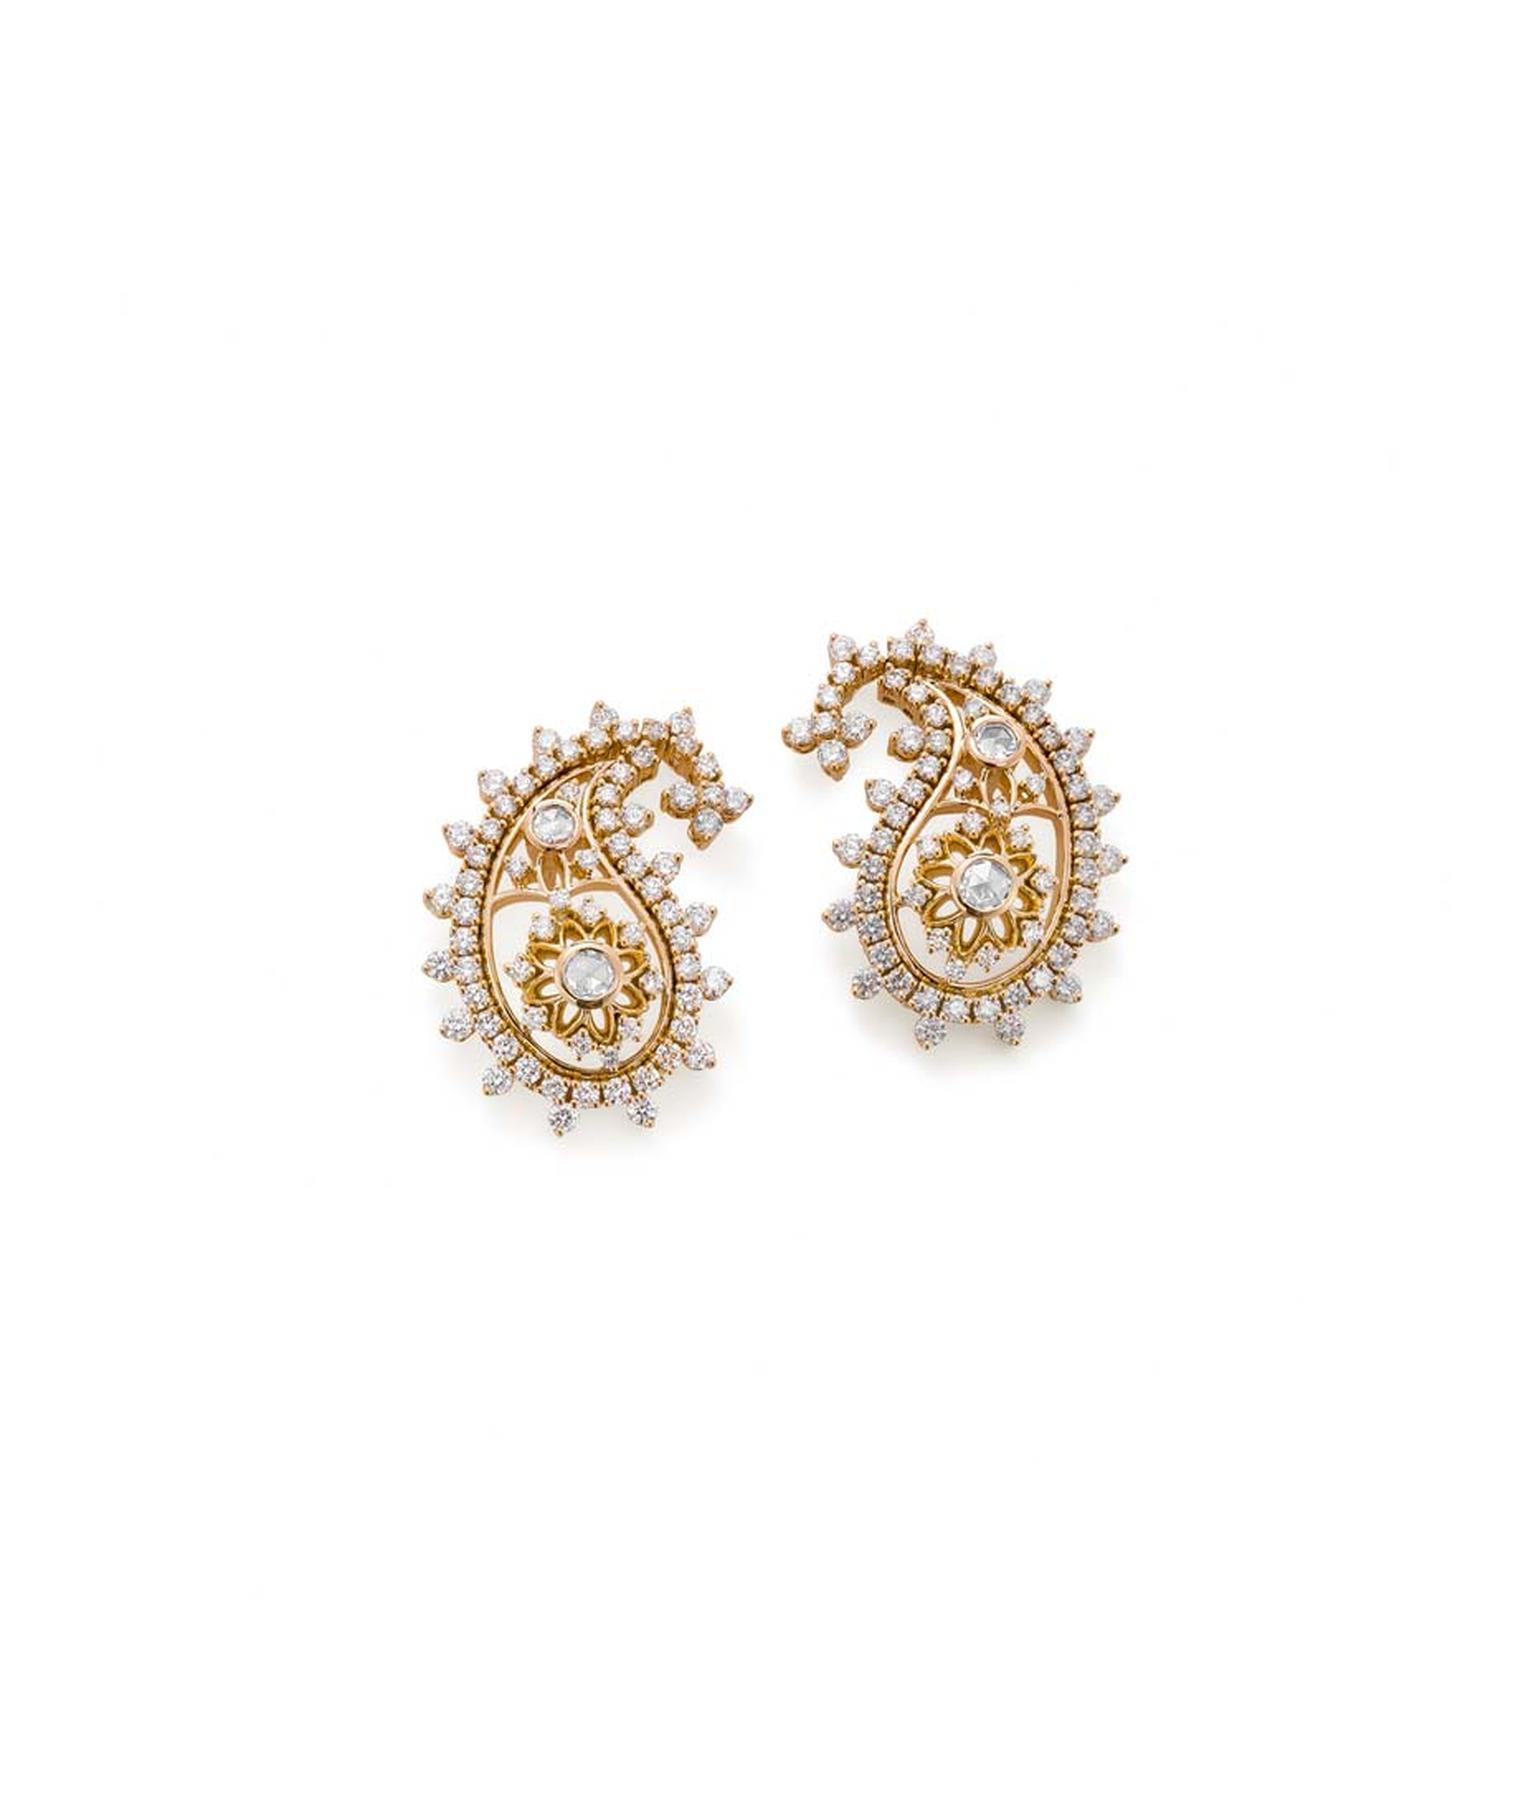 Ganjam’s Paisley collection gold earrings studded with diamonds.